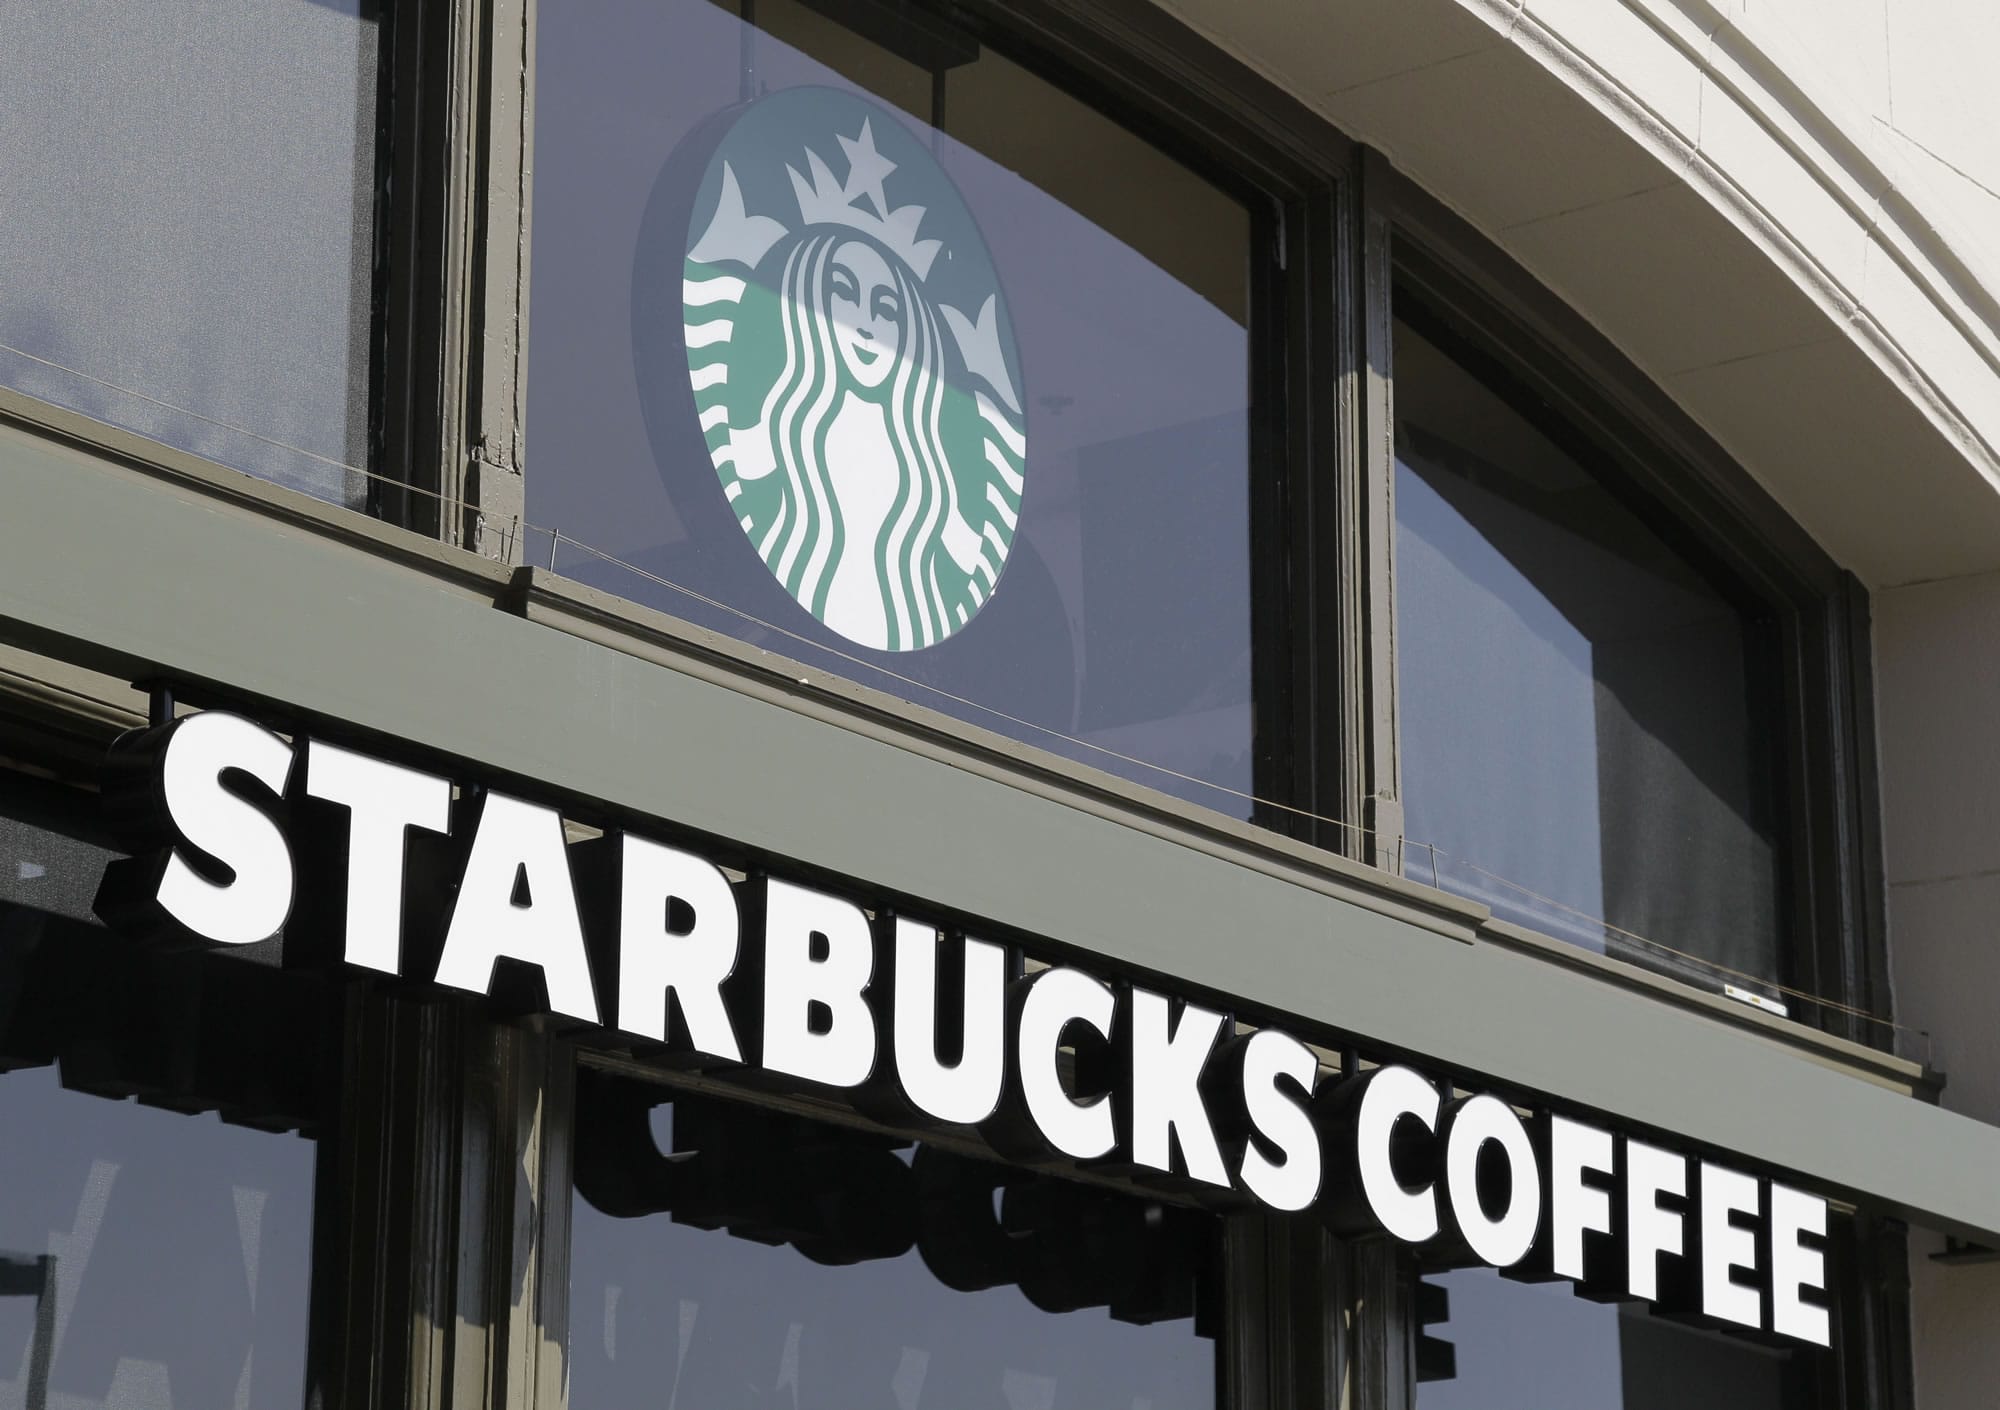 Seattle coffee chain Starbucks has asked that patrons not bring guns inside its cafes, though it has stopped short of a ban.